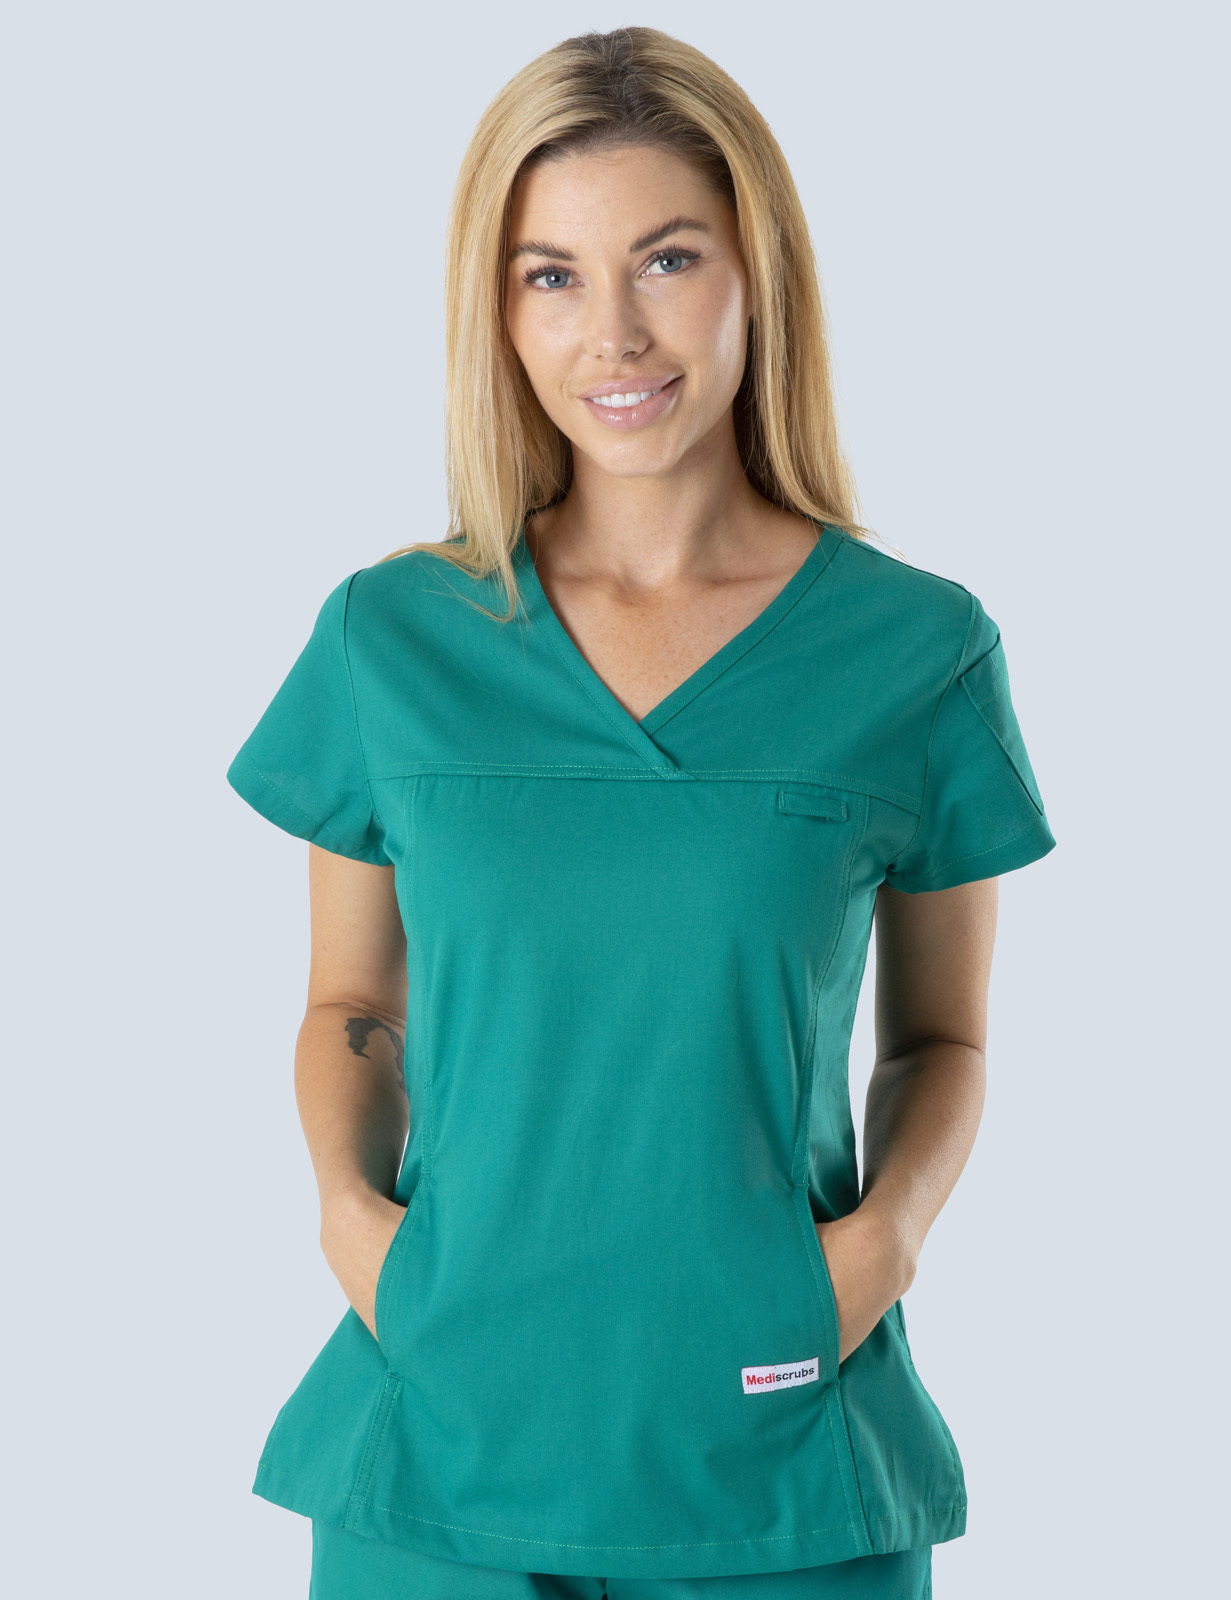 Women's Fit Solid Scrub Top - Hunter - 2X Large